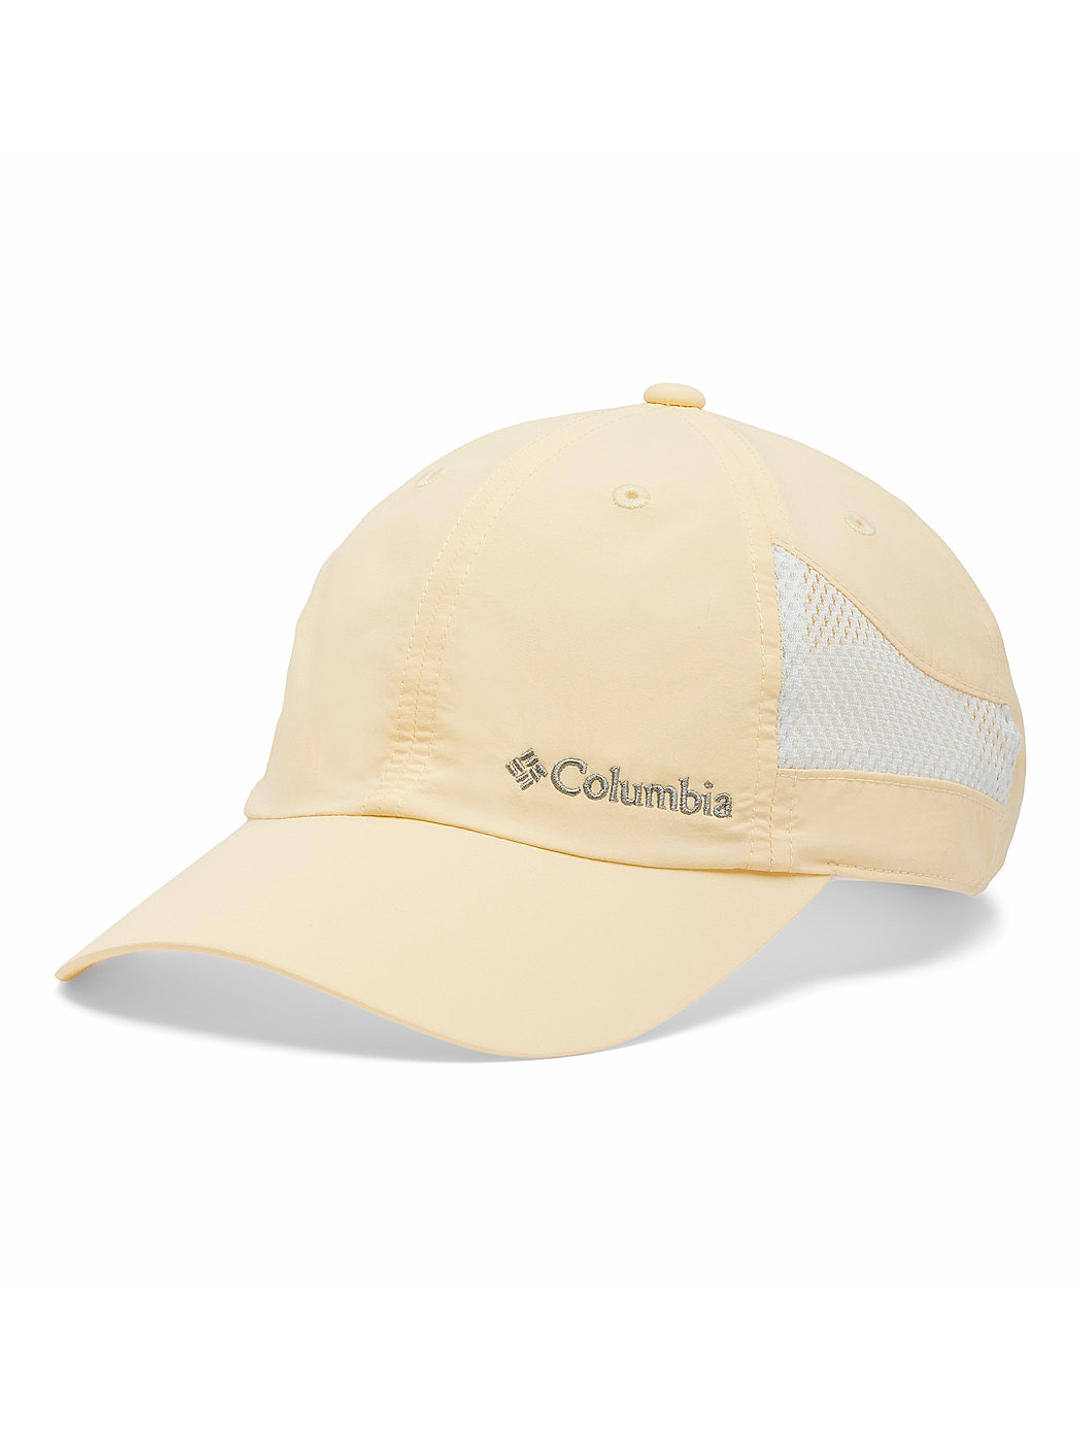 Buy Yellow Tech Shade Hat for Men and Women Online at Columbia Sportswear